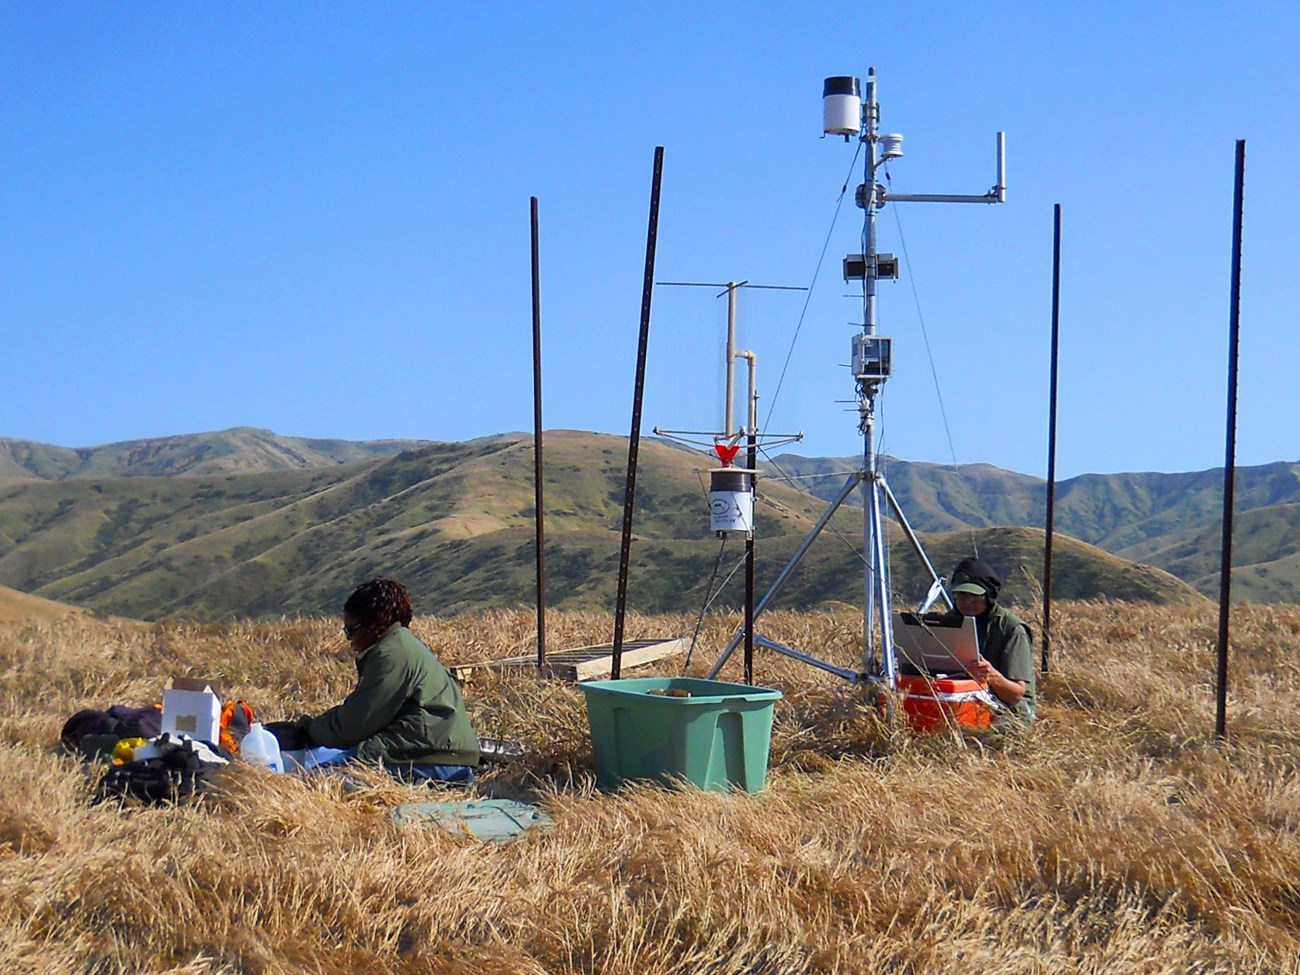 Scientists working on a weather station on a grassy hilltop